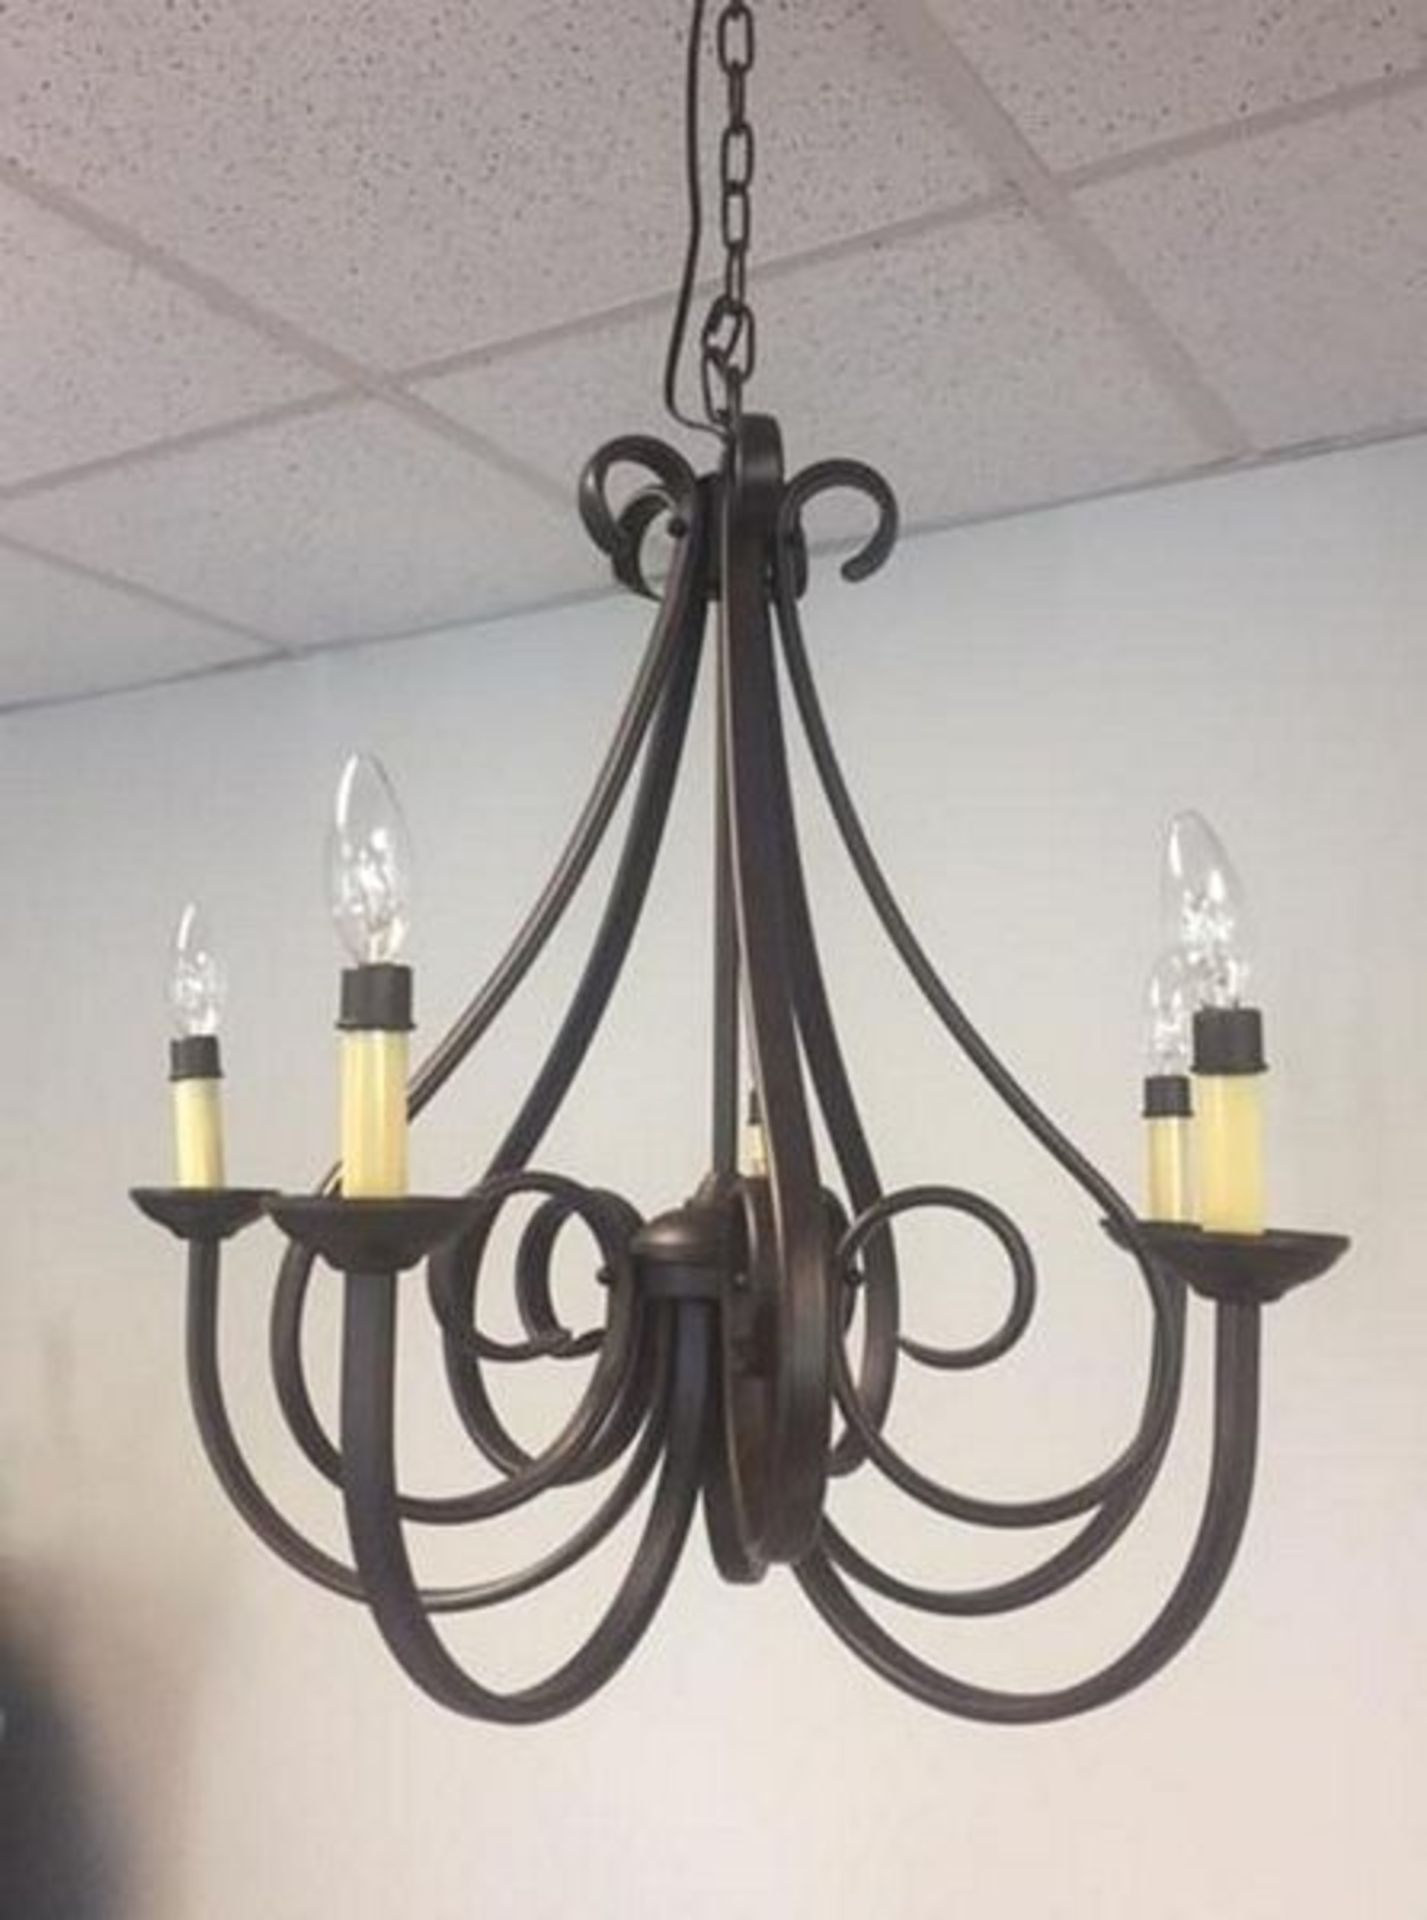 LOT: (10) Dover 5 Chandeliers with Hanging Arm Bracket